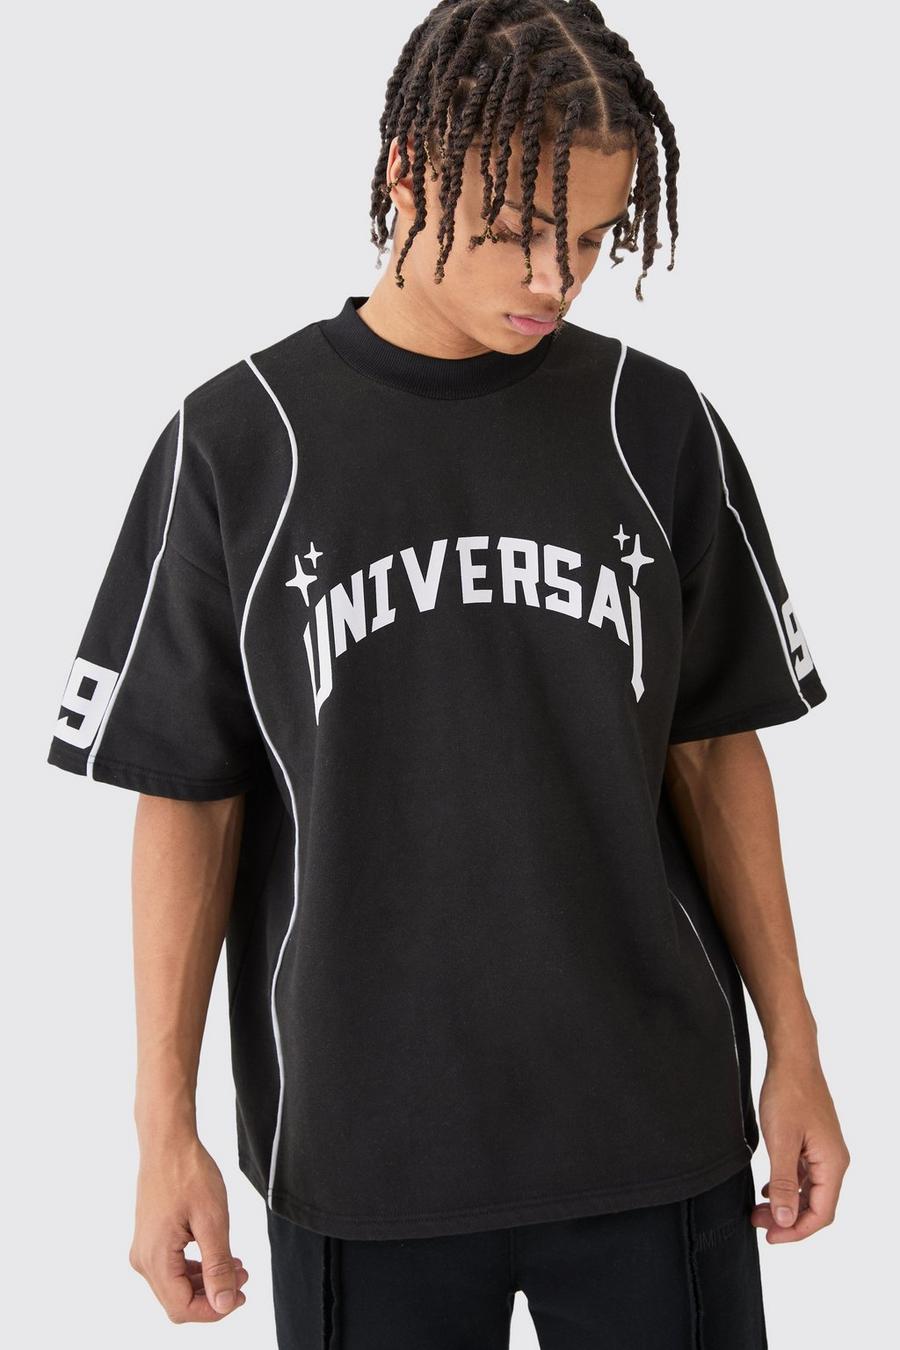 Black Oversized Extended Neck Universal Graphic T-shirt